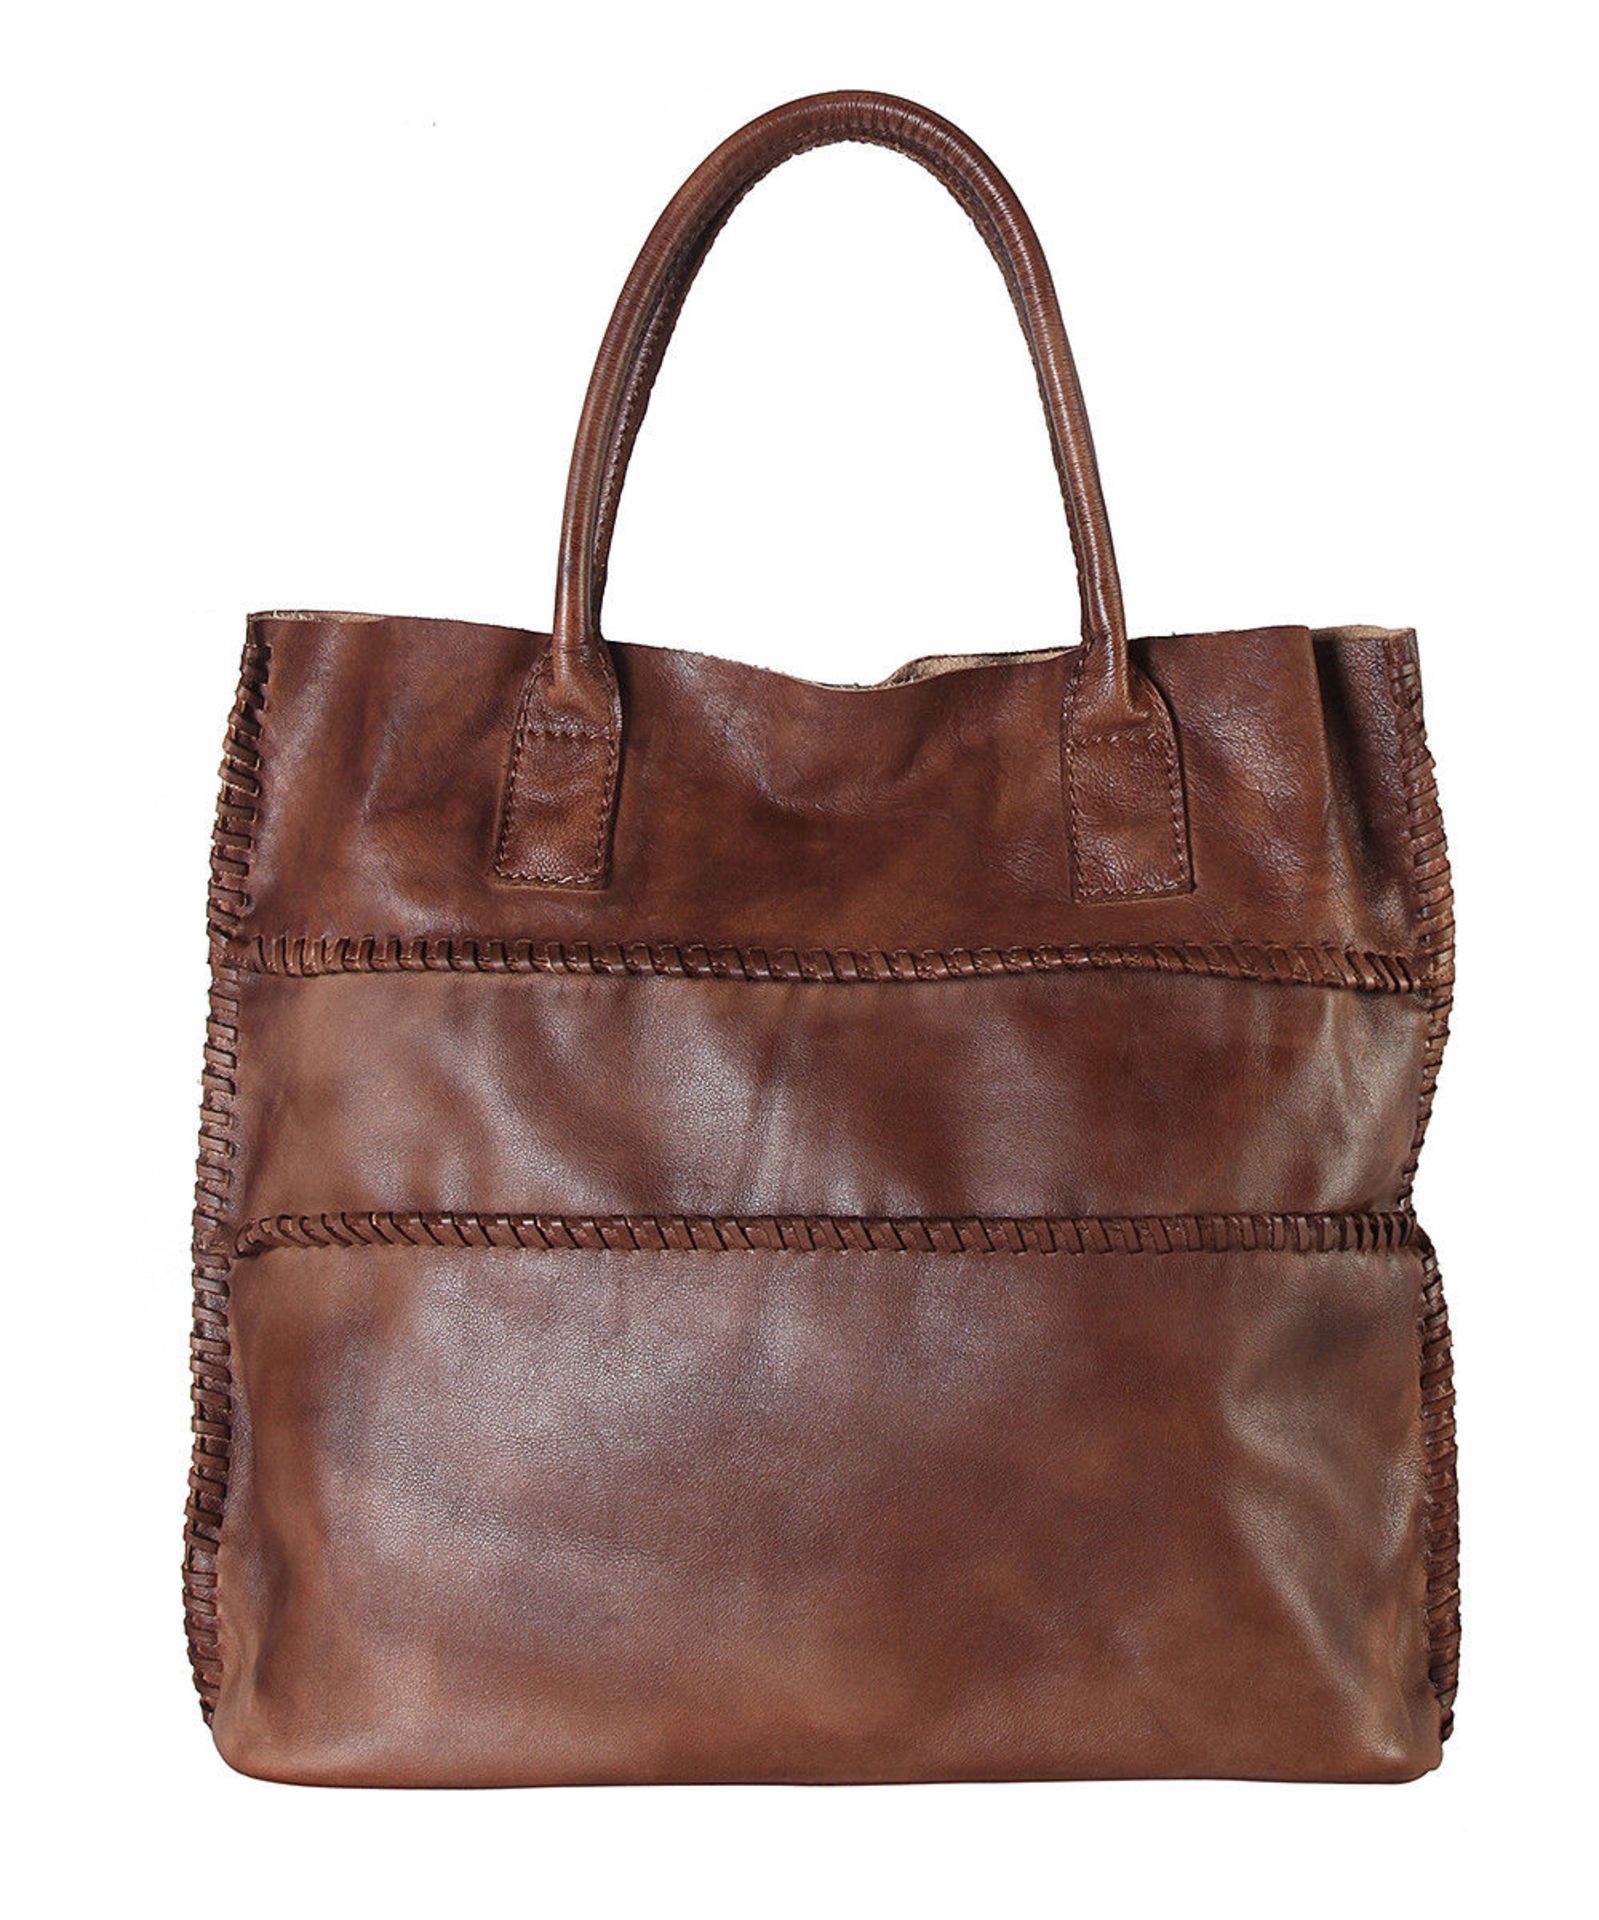 Diophy Leather Brown Leather Double-Stitch Tote (New With Tags) [Ref: 43611716-Tf-Tub 1]-Tf